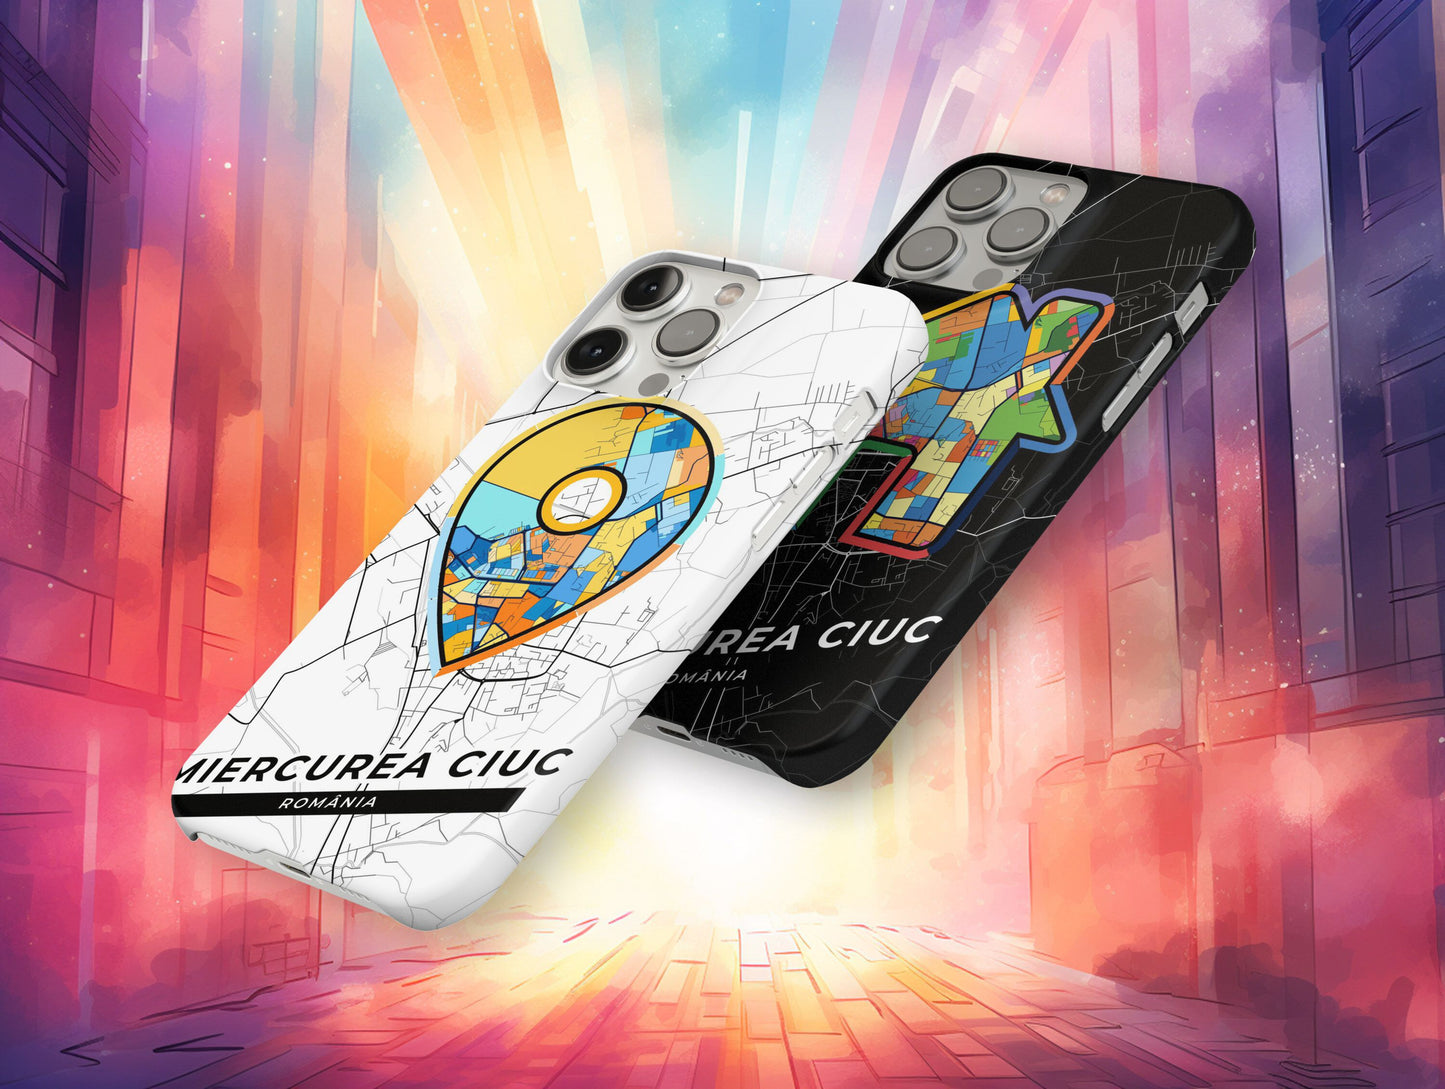 Miercurea Ciuc Romania slim phone case with colorful icon. Birthday, wedding or housewarming gift. Couple match cases.